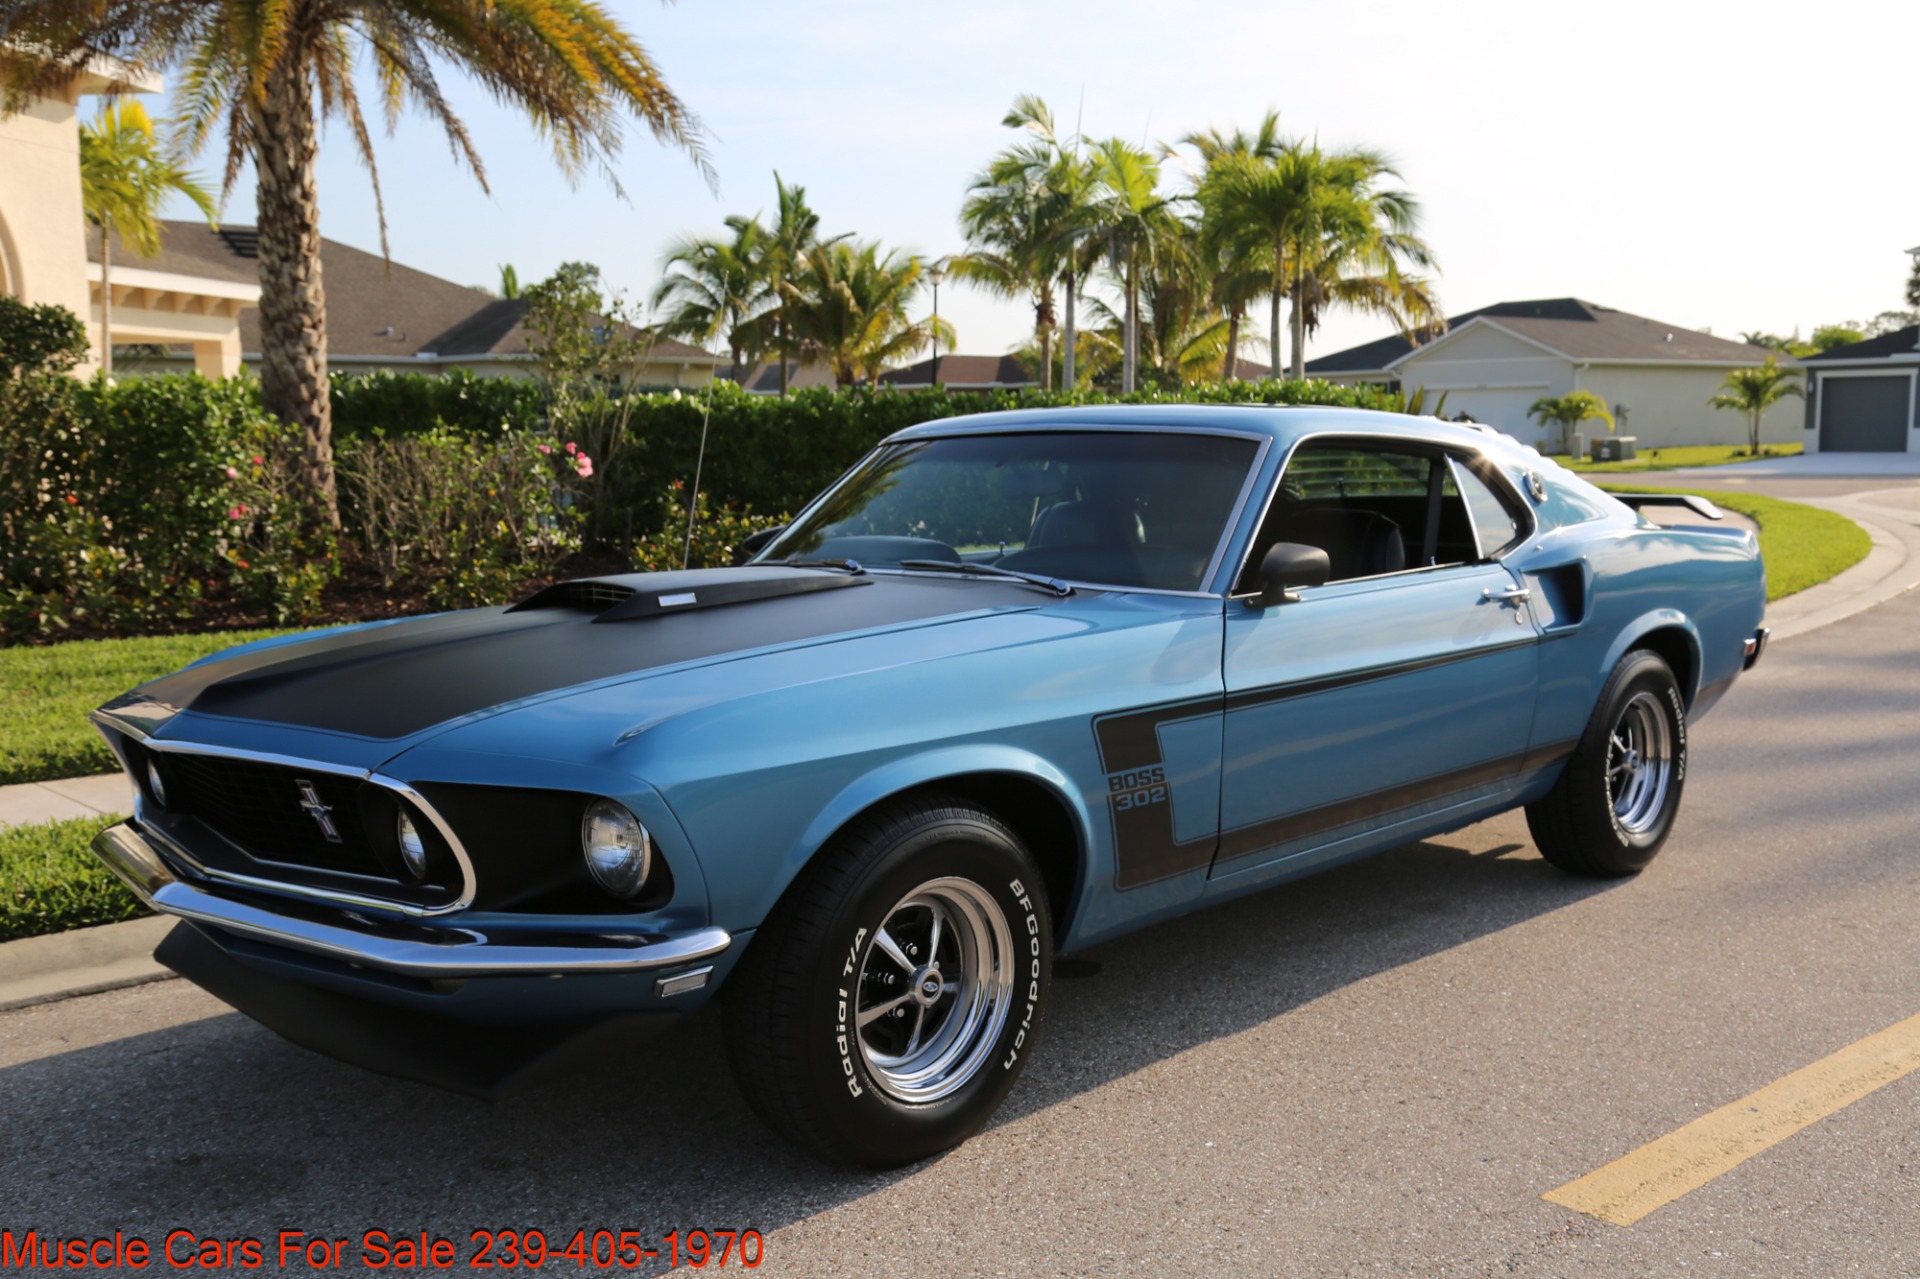 Used 1969 Ford Mustang Fastback For Sale ($47,000) | Muscle Cars for ...